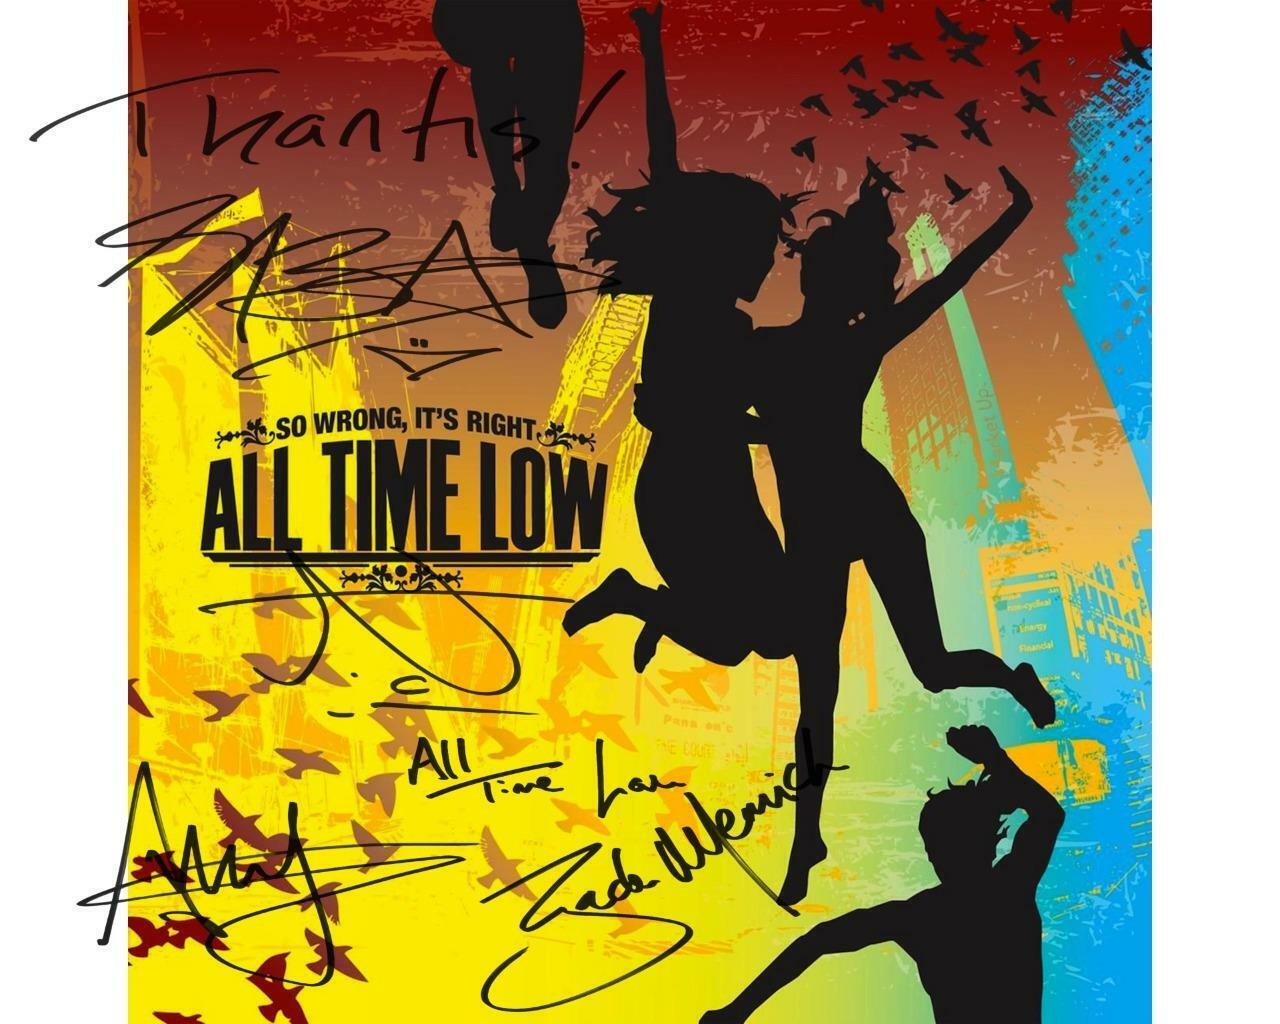 ALL TIME LOW Album So wrong,it's right SIGNED AUTOGRAPHED 10X8 REPRO Photo Poster painting PRINT